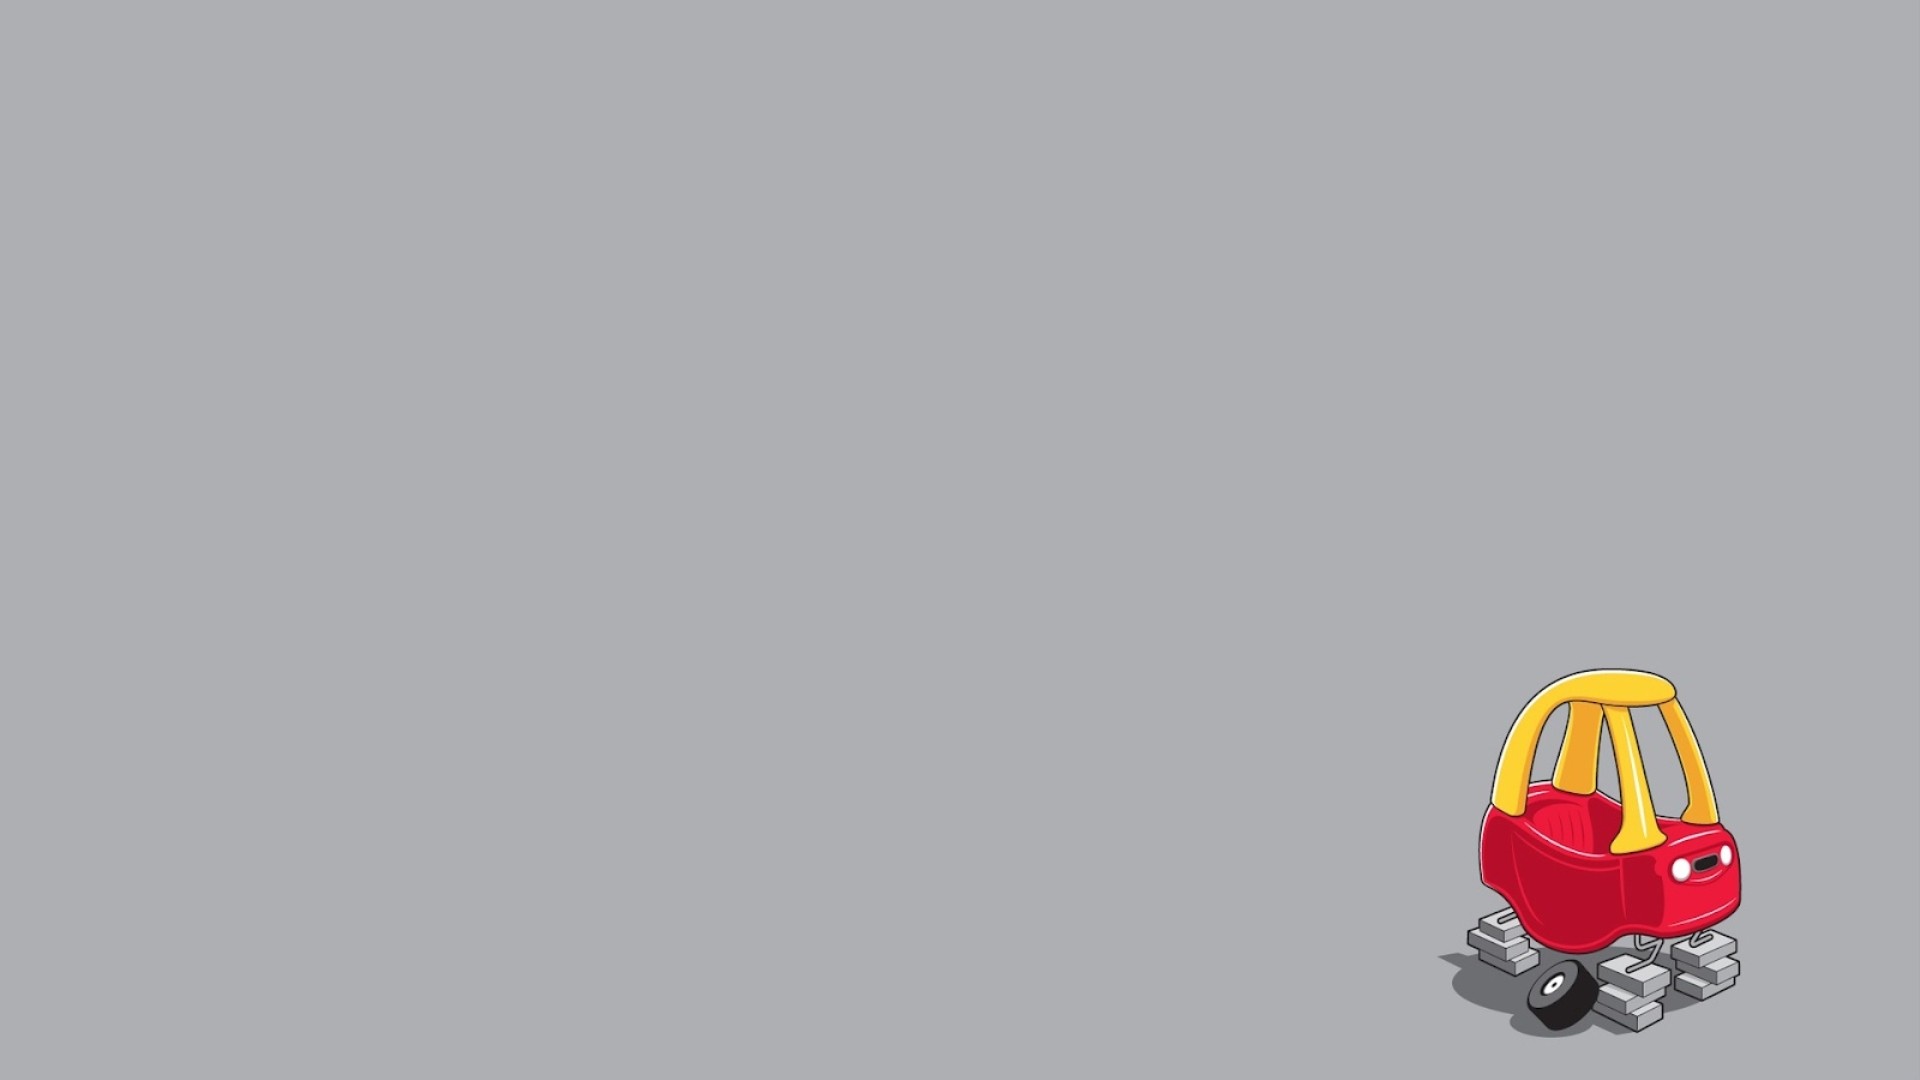 General 1920x1080 tires vehicle humor simple background gray background minimalism car